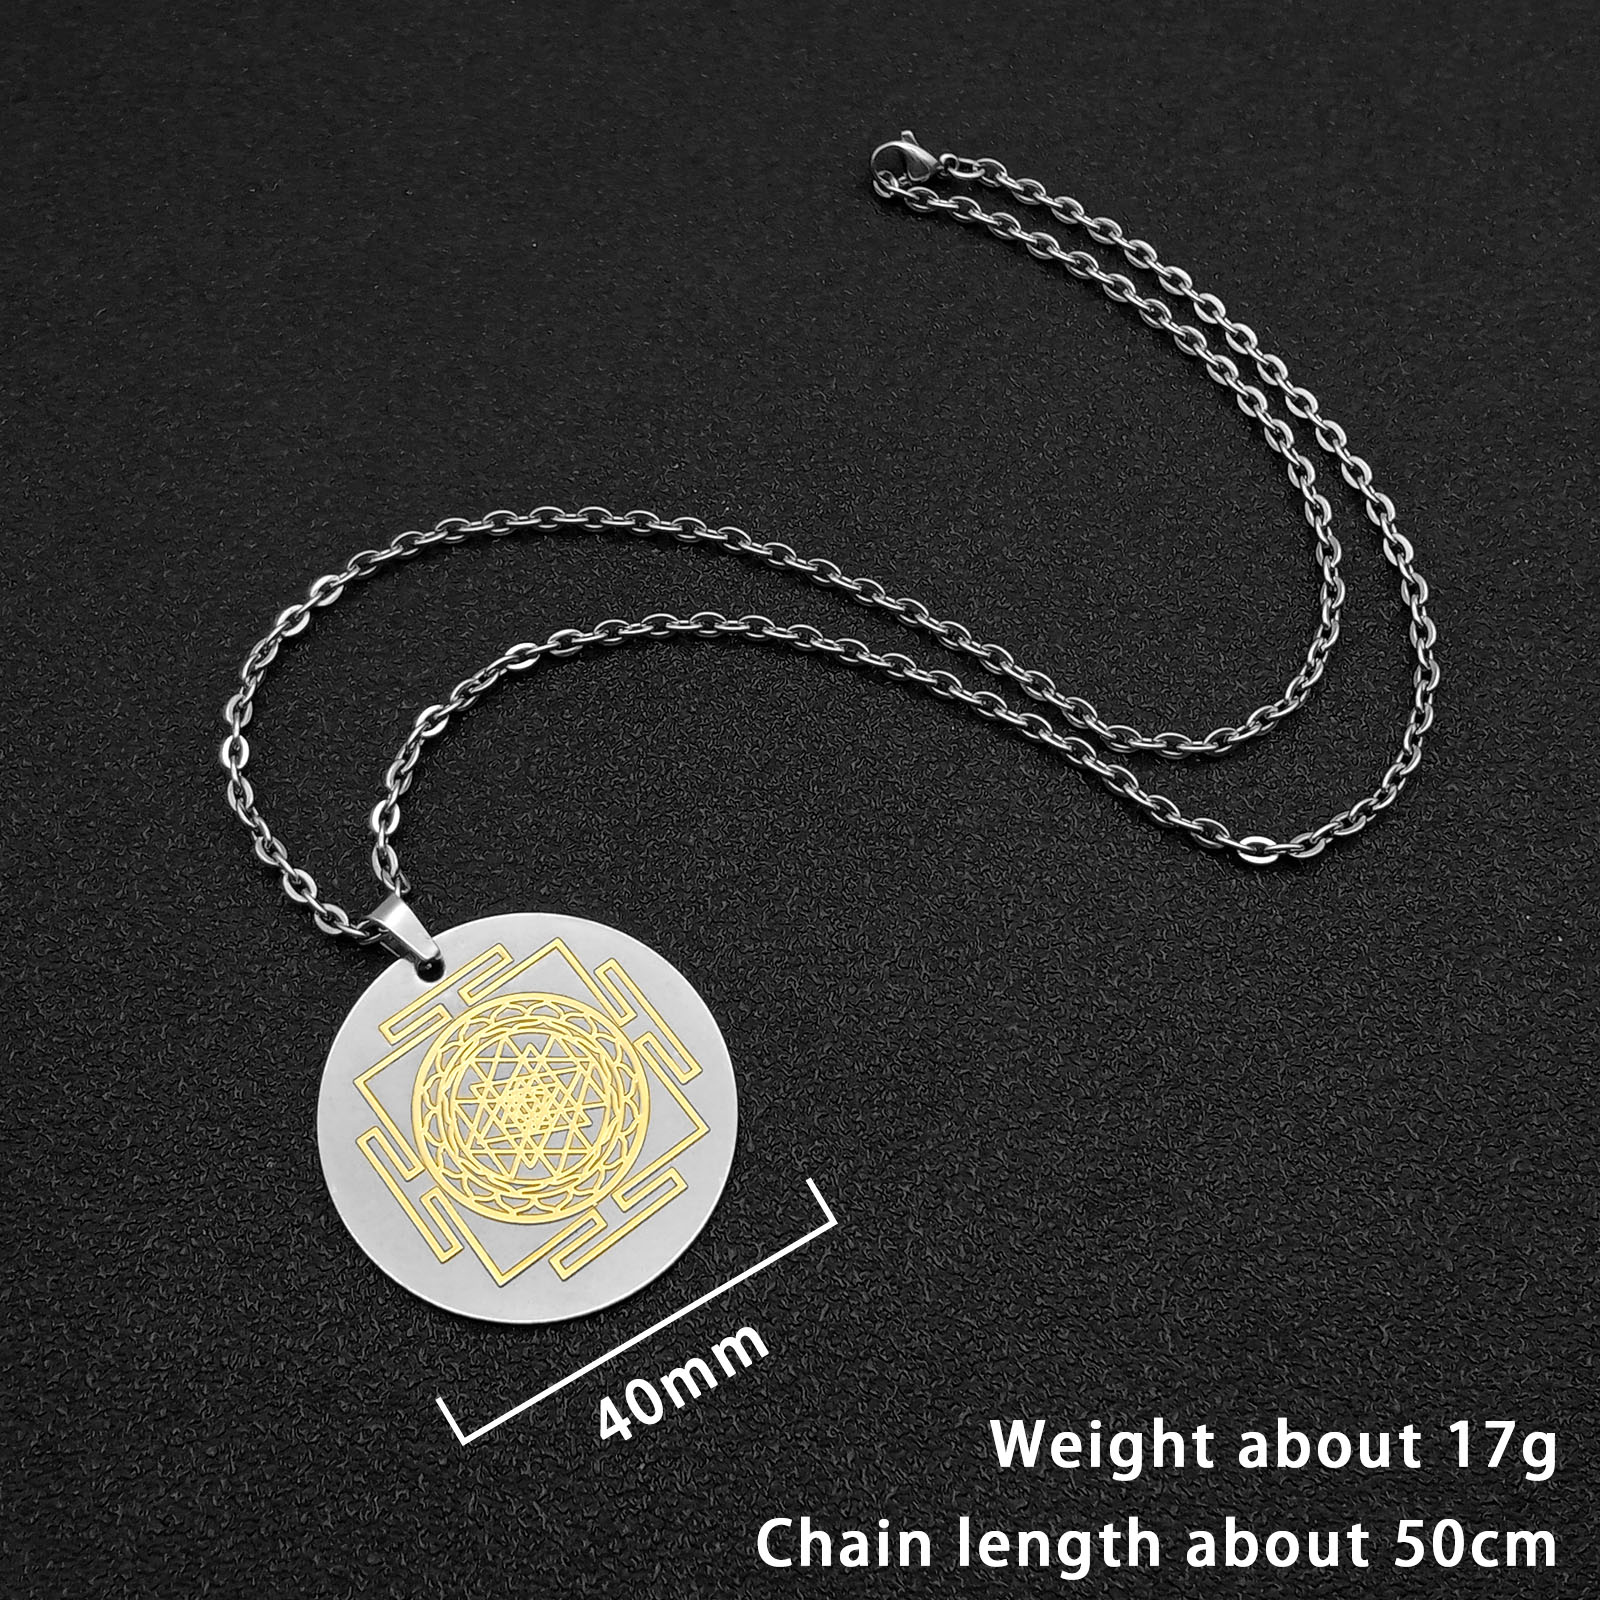 1:The pendant is about 40mm long, about 1mm thick, and the chain is about 50cm long